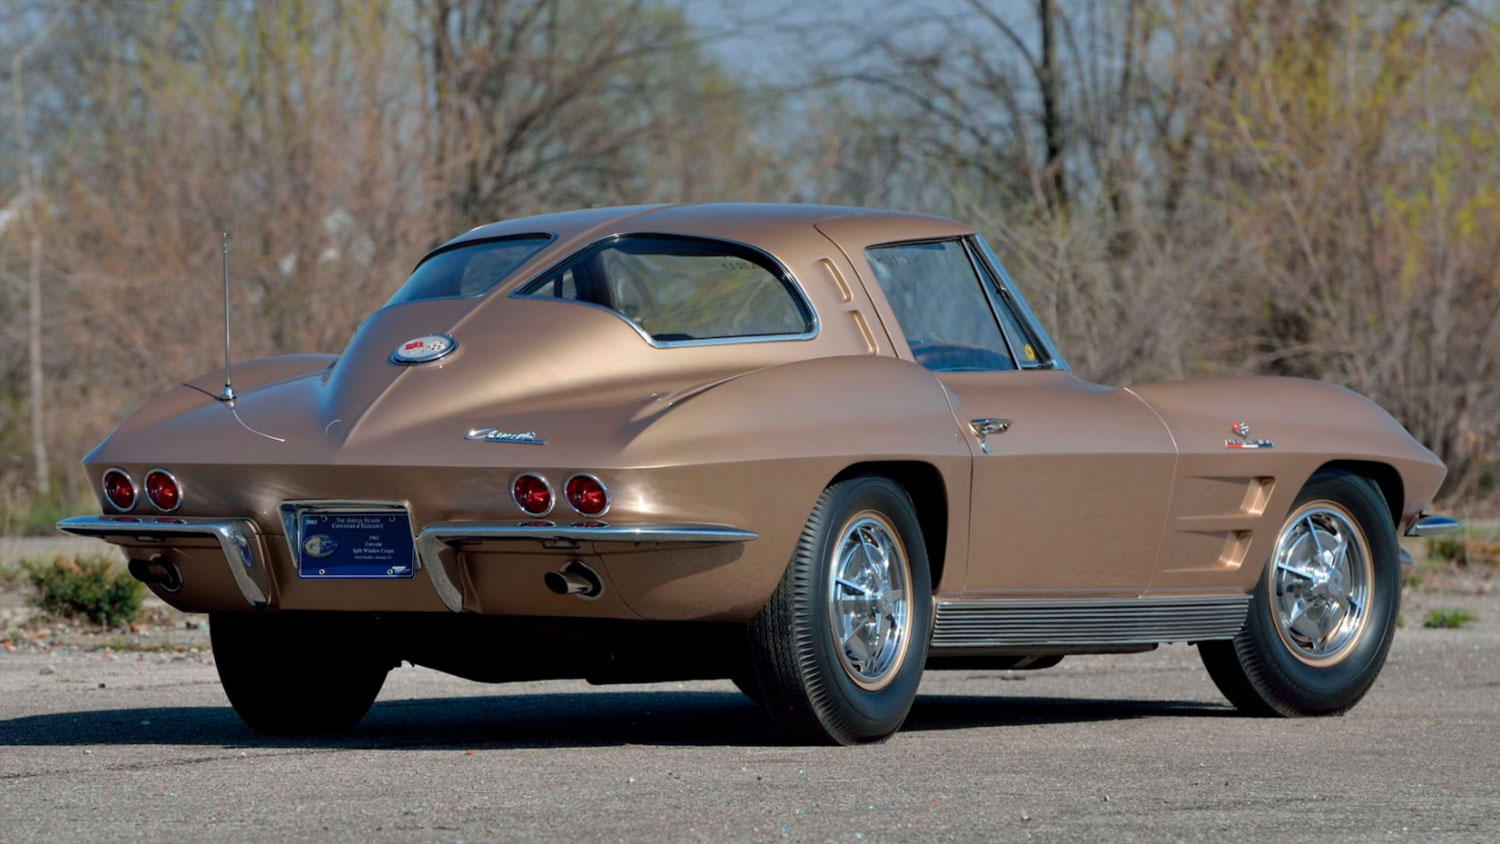 1963 Chevy Corvette Z06/N03 Split Window Coupe Heads To Auction